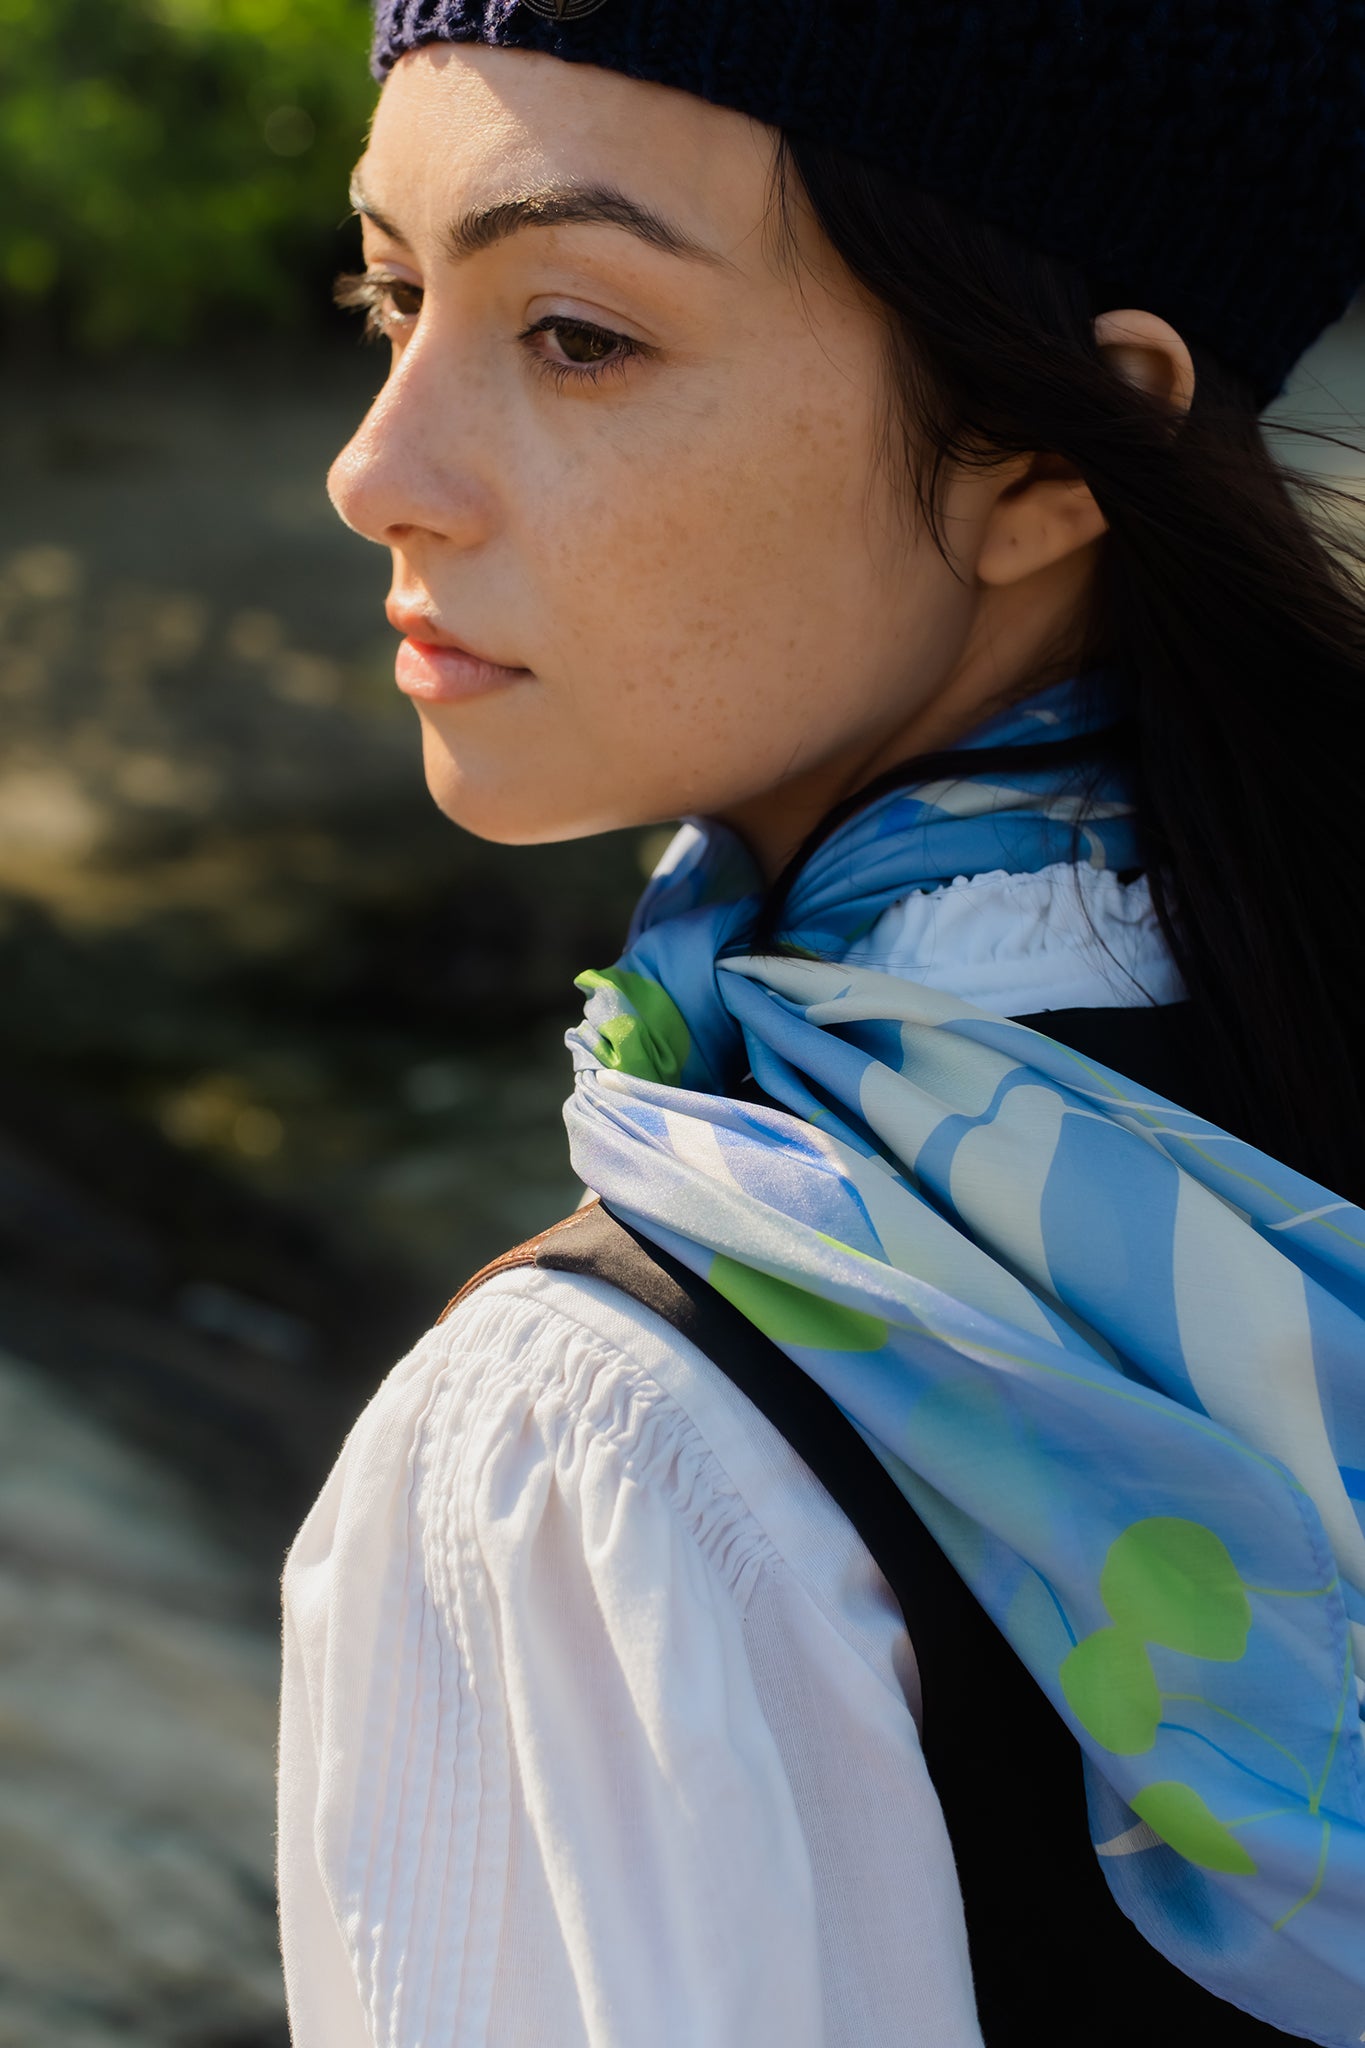 models looks over shoulder while wearing a silk scarf with a finished edge